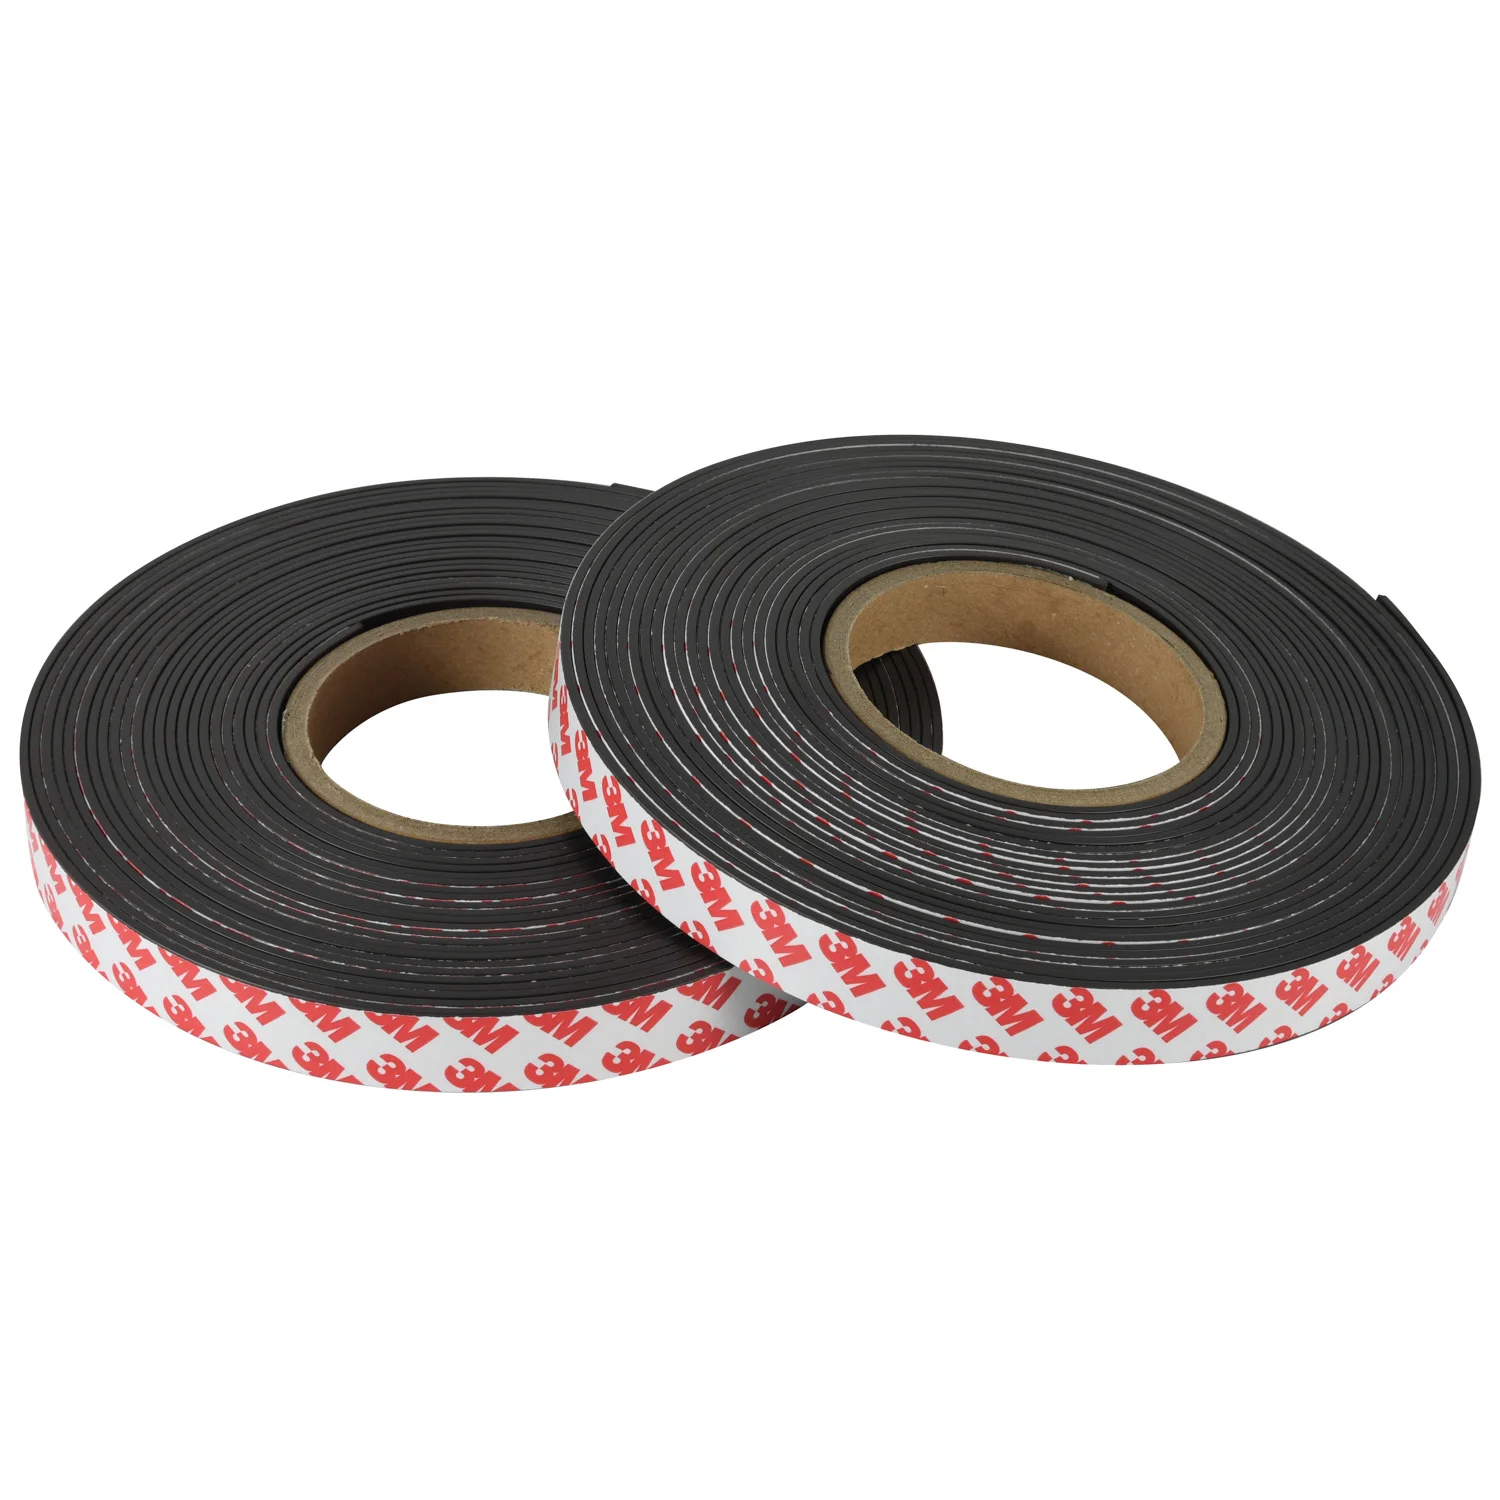 NextClimb - Flat Adhesive Magnetic Strips Extra Strong Magnetic